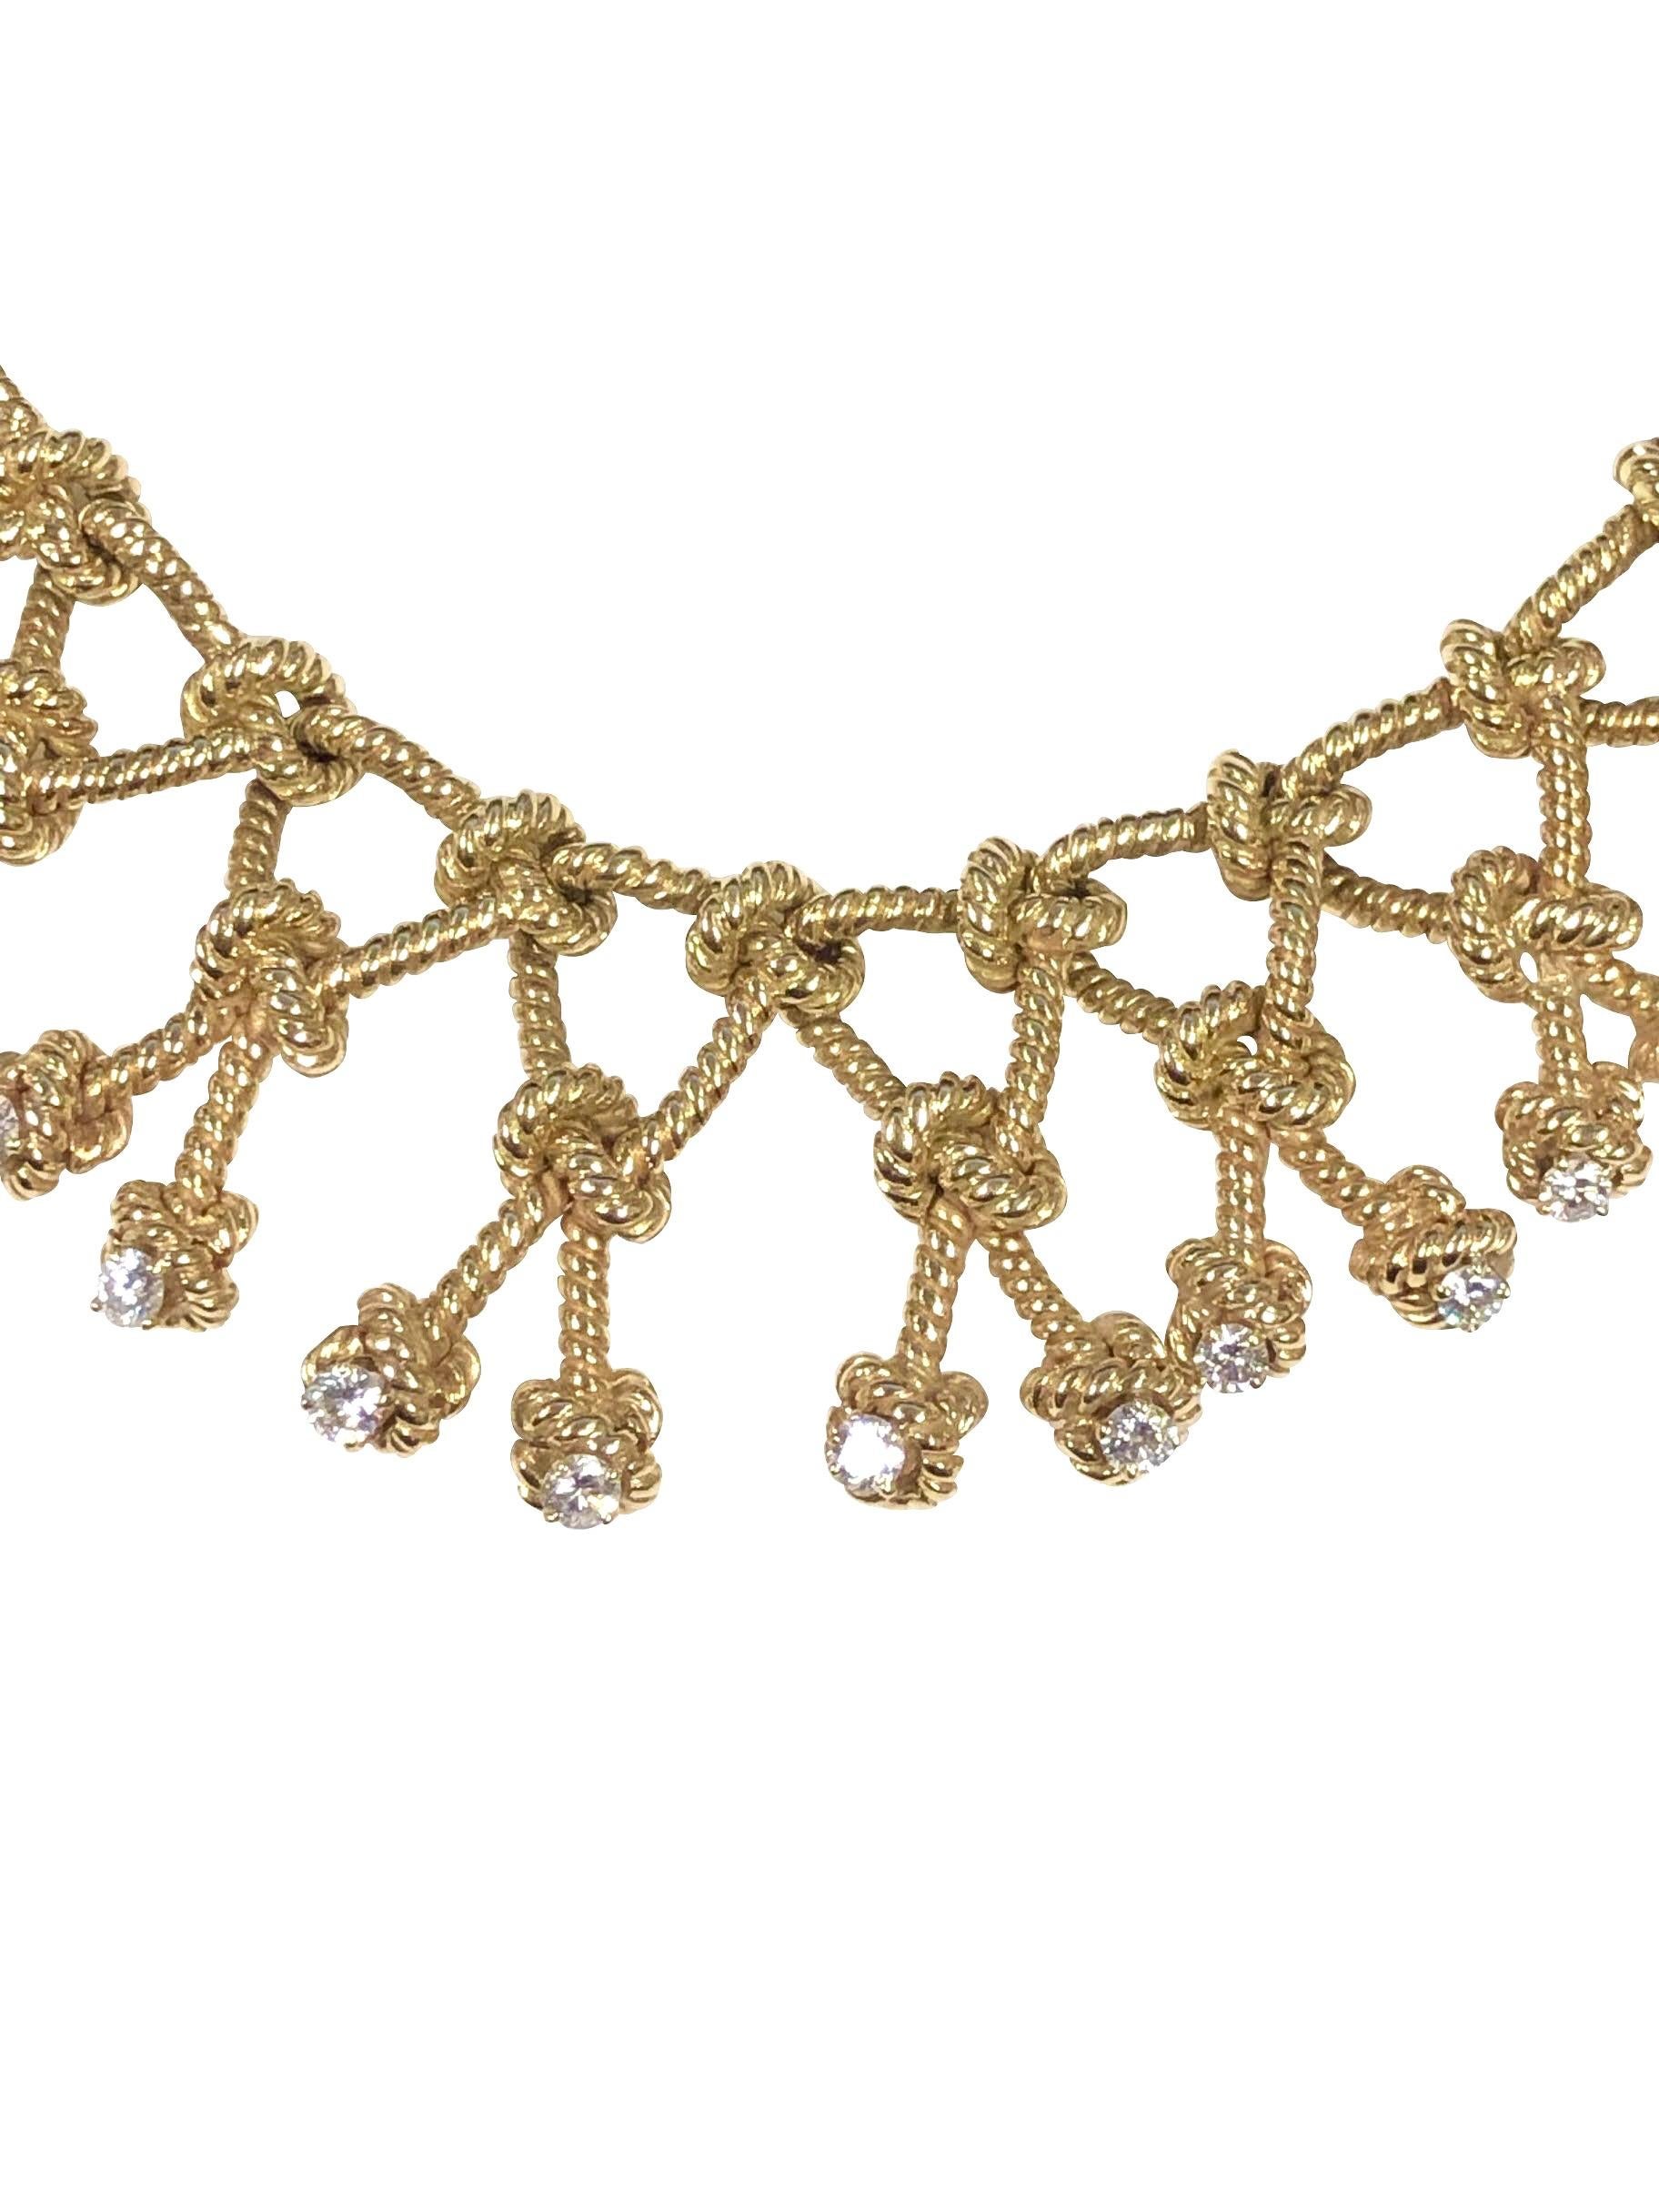 Circa 1970s Verdura 14K Yellow Gold Twisted Rope Fringe Necklace, measuring 15 1/4 inch in length 1 1/4 inch wide tapering down to 1/2 inch and weighing 149 Grams. Set with 25 Round Brilliant cut Diamonds totaling 2.50 Carats. 